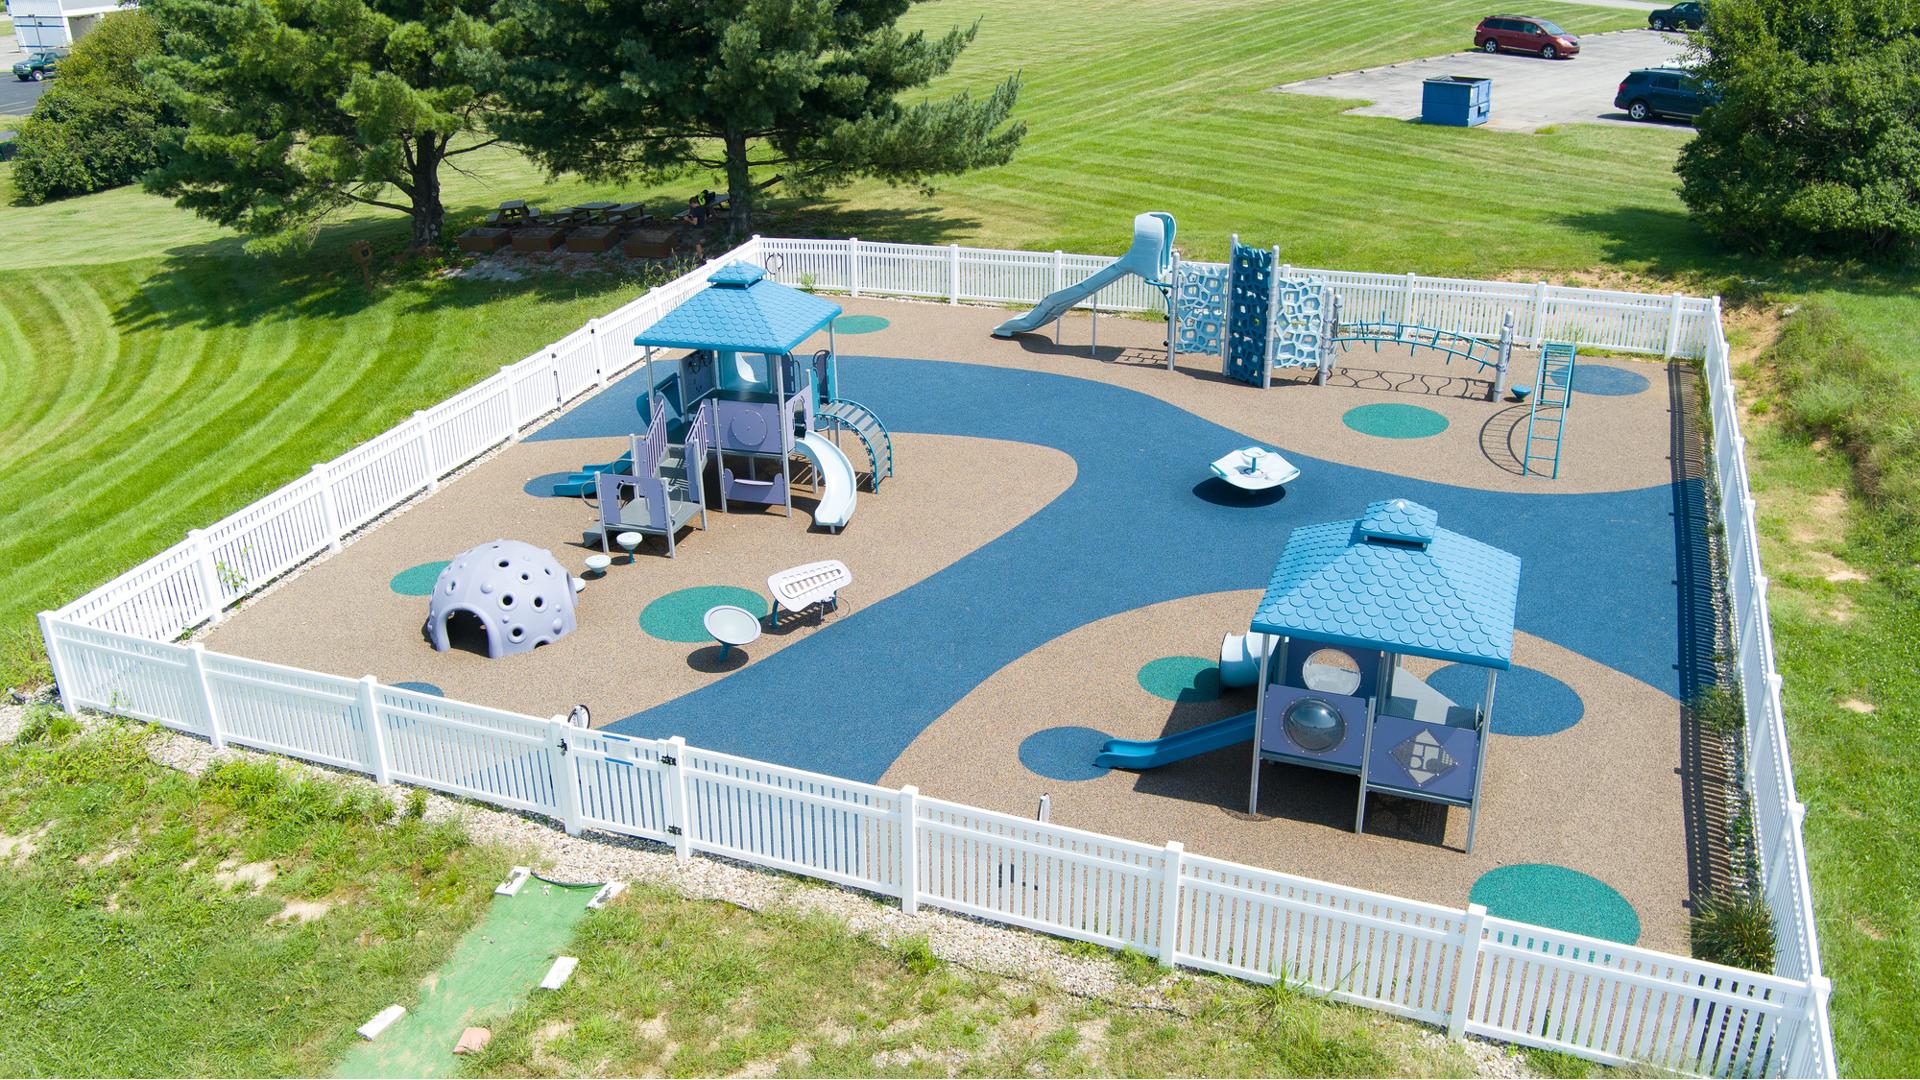 Elevated view of a square play space surrounded by a white picket fence with three separate play structures ranging accessibility from toddlers to twelve year old's.